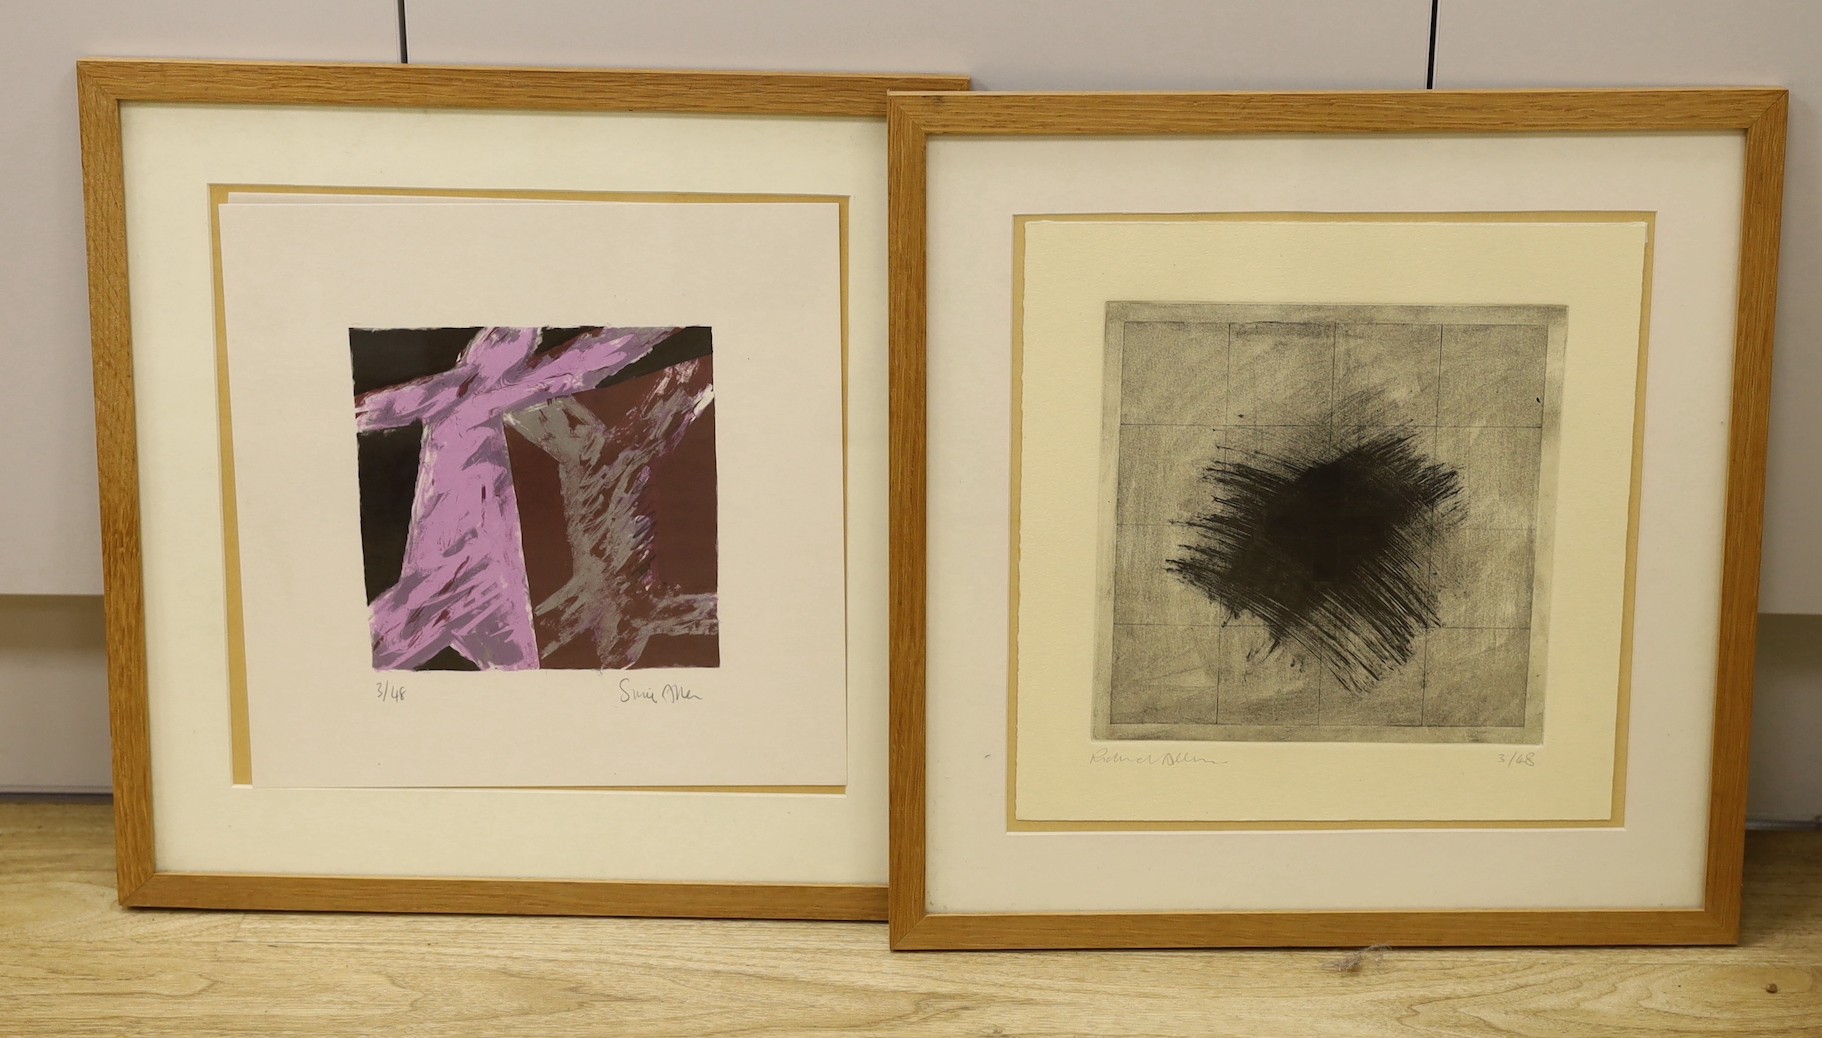 Richard and Susie Allen, two limited edition prints, Untitled, both signed and numbered 3/48, 23 x 23cm and 18 x 18cm